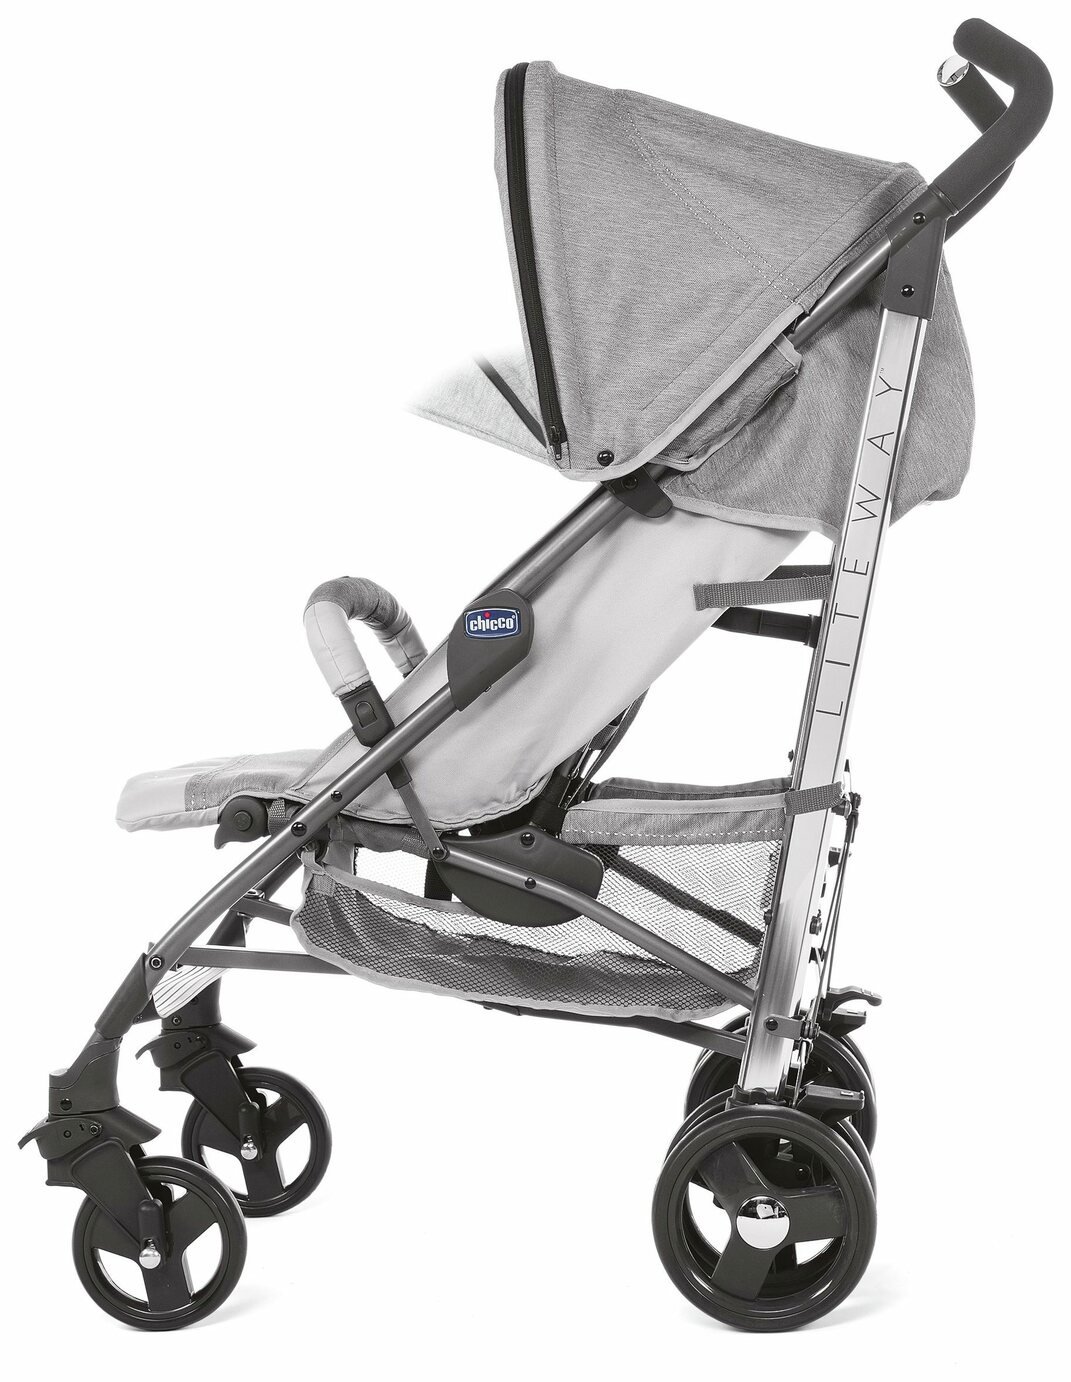 Chicco Liteway 3 SE Stroller Review